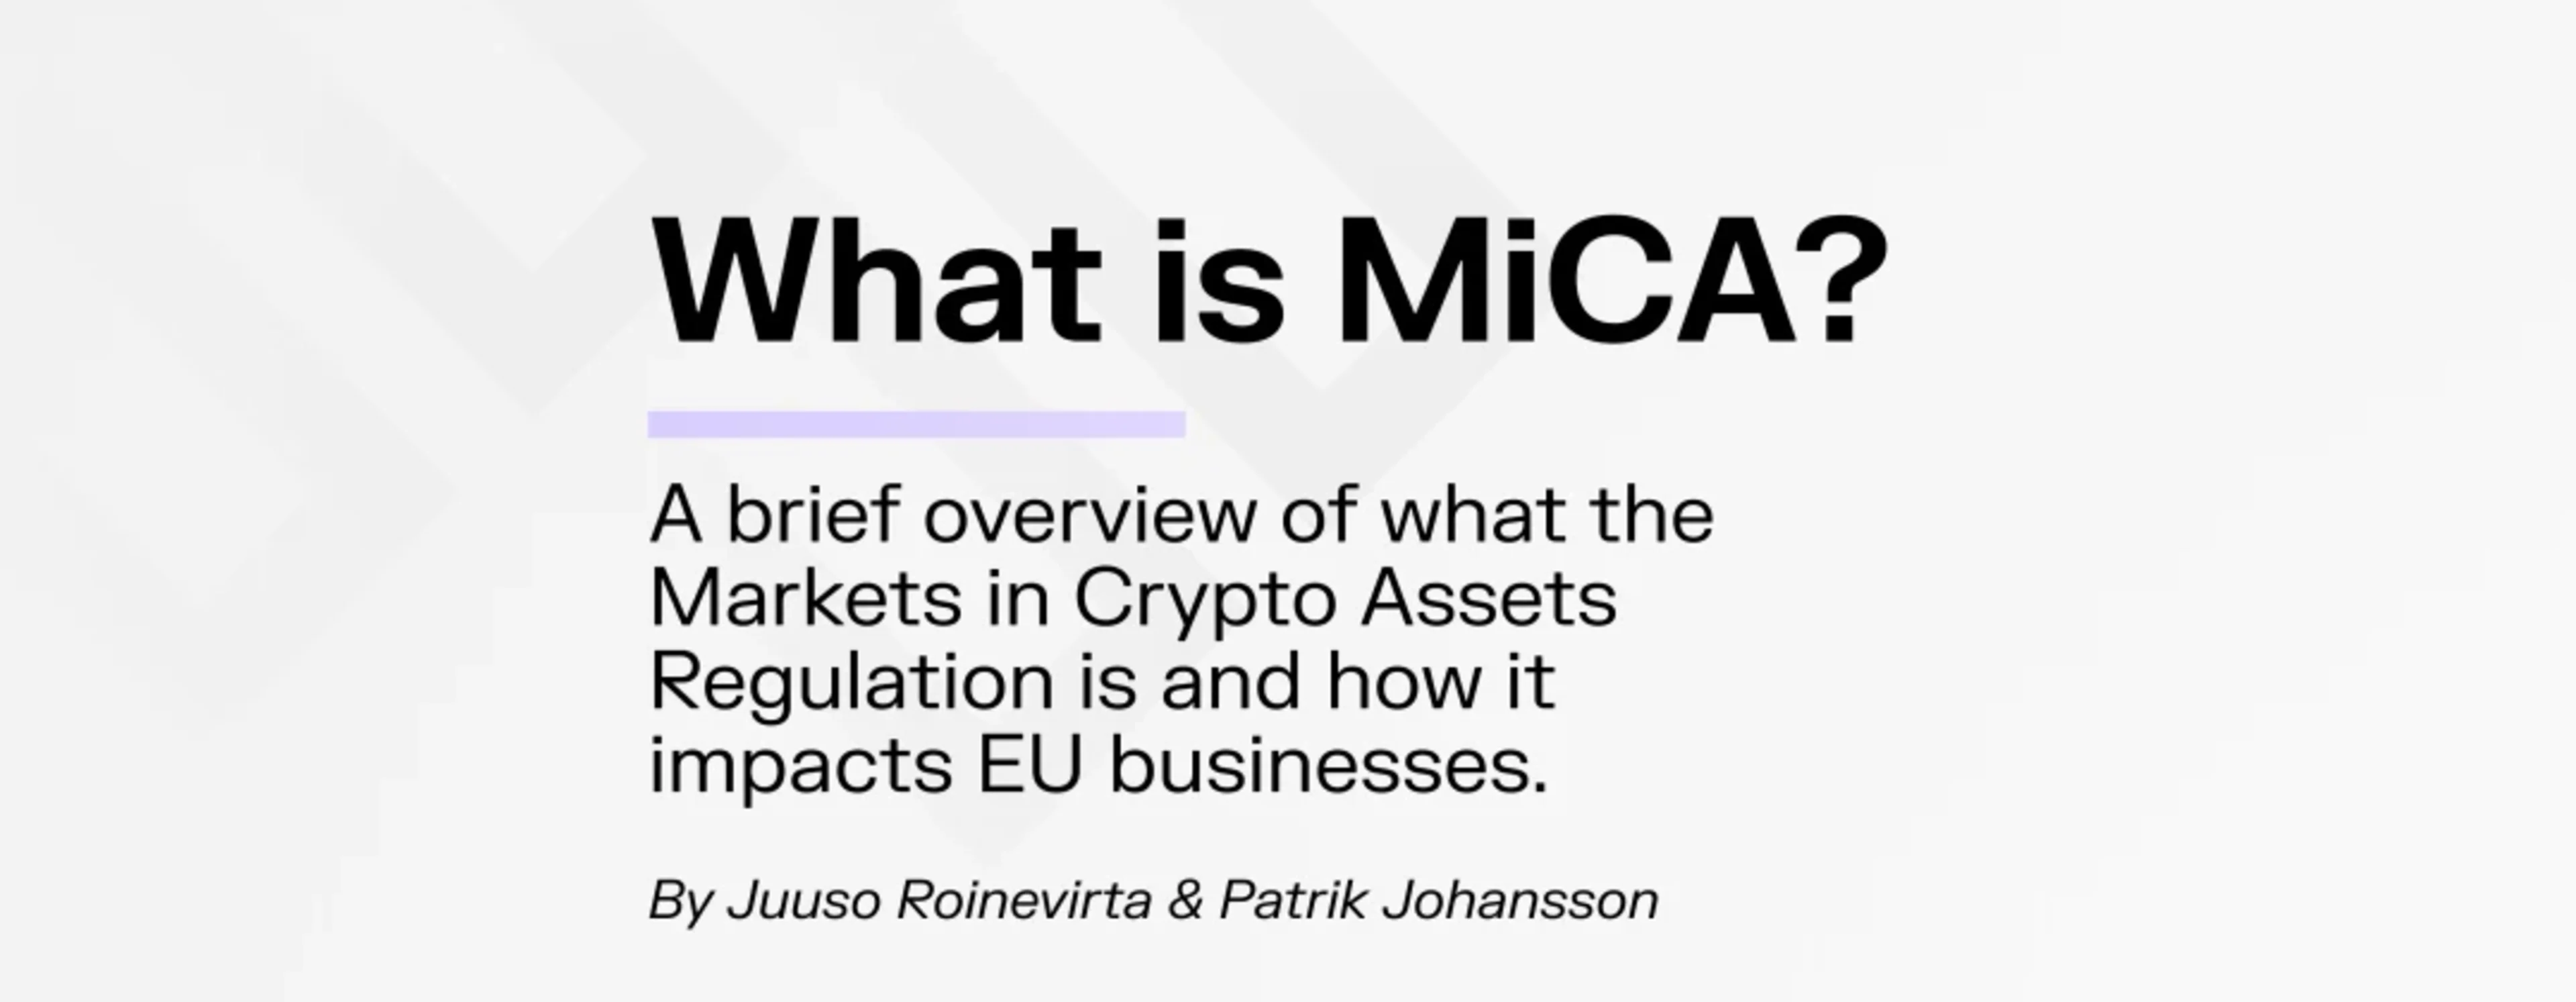 MiCA-blog-infographic-title